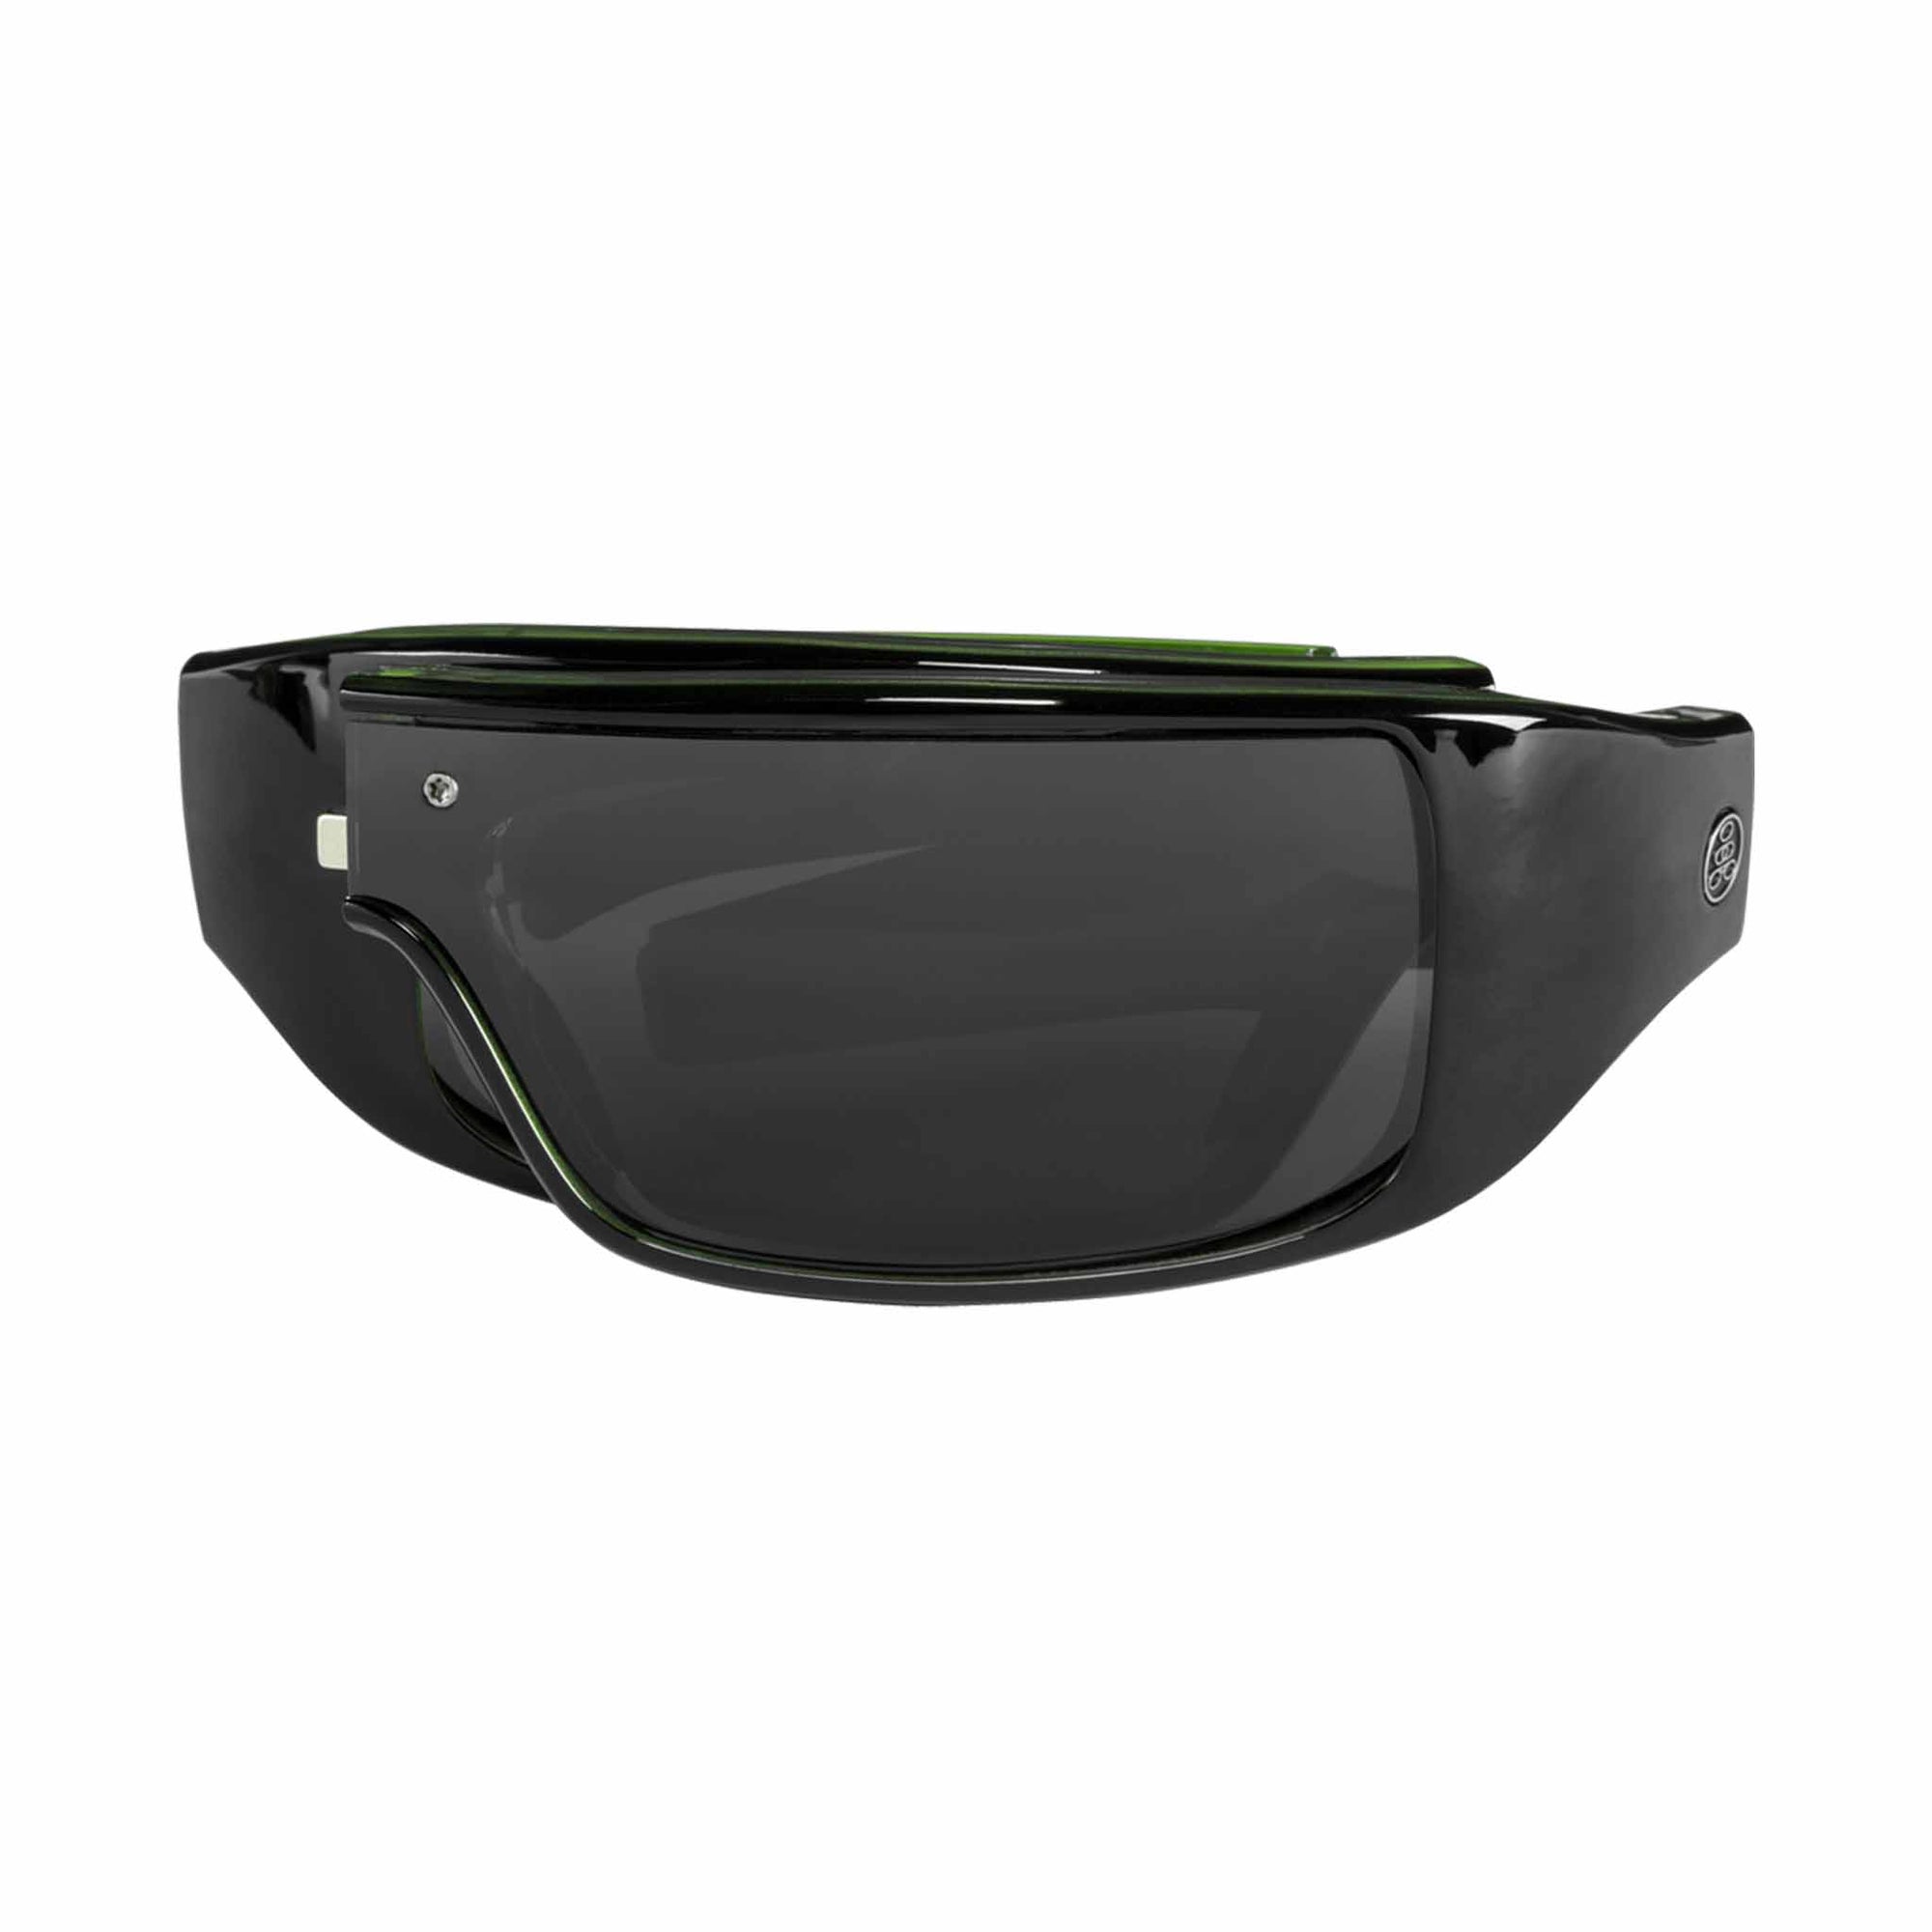 Popticals, Premium Compact Sunglasses, PopGear, 040050-GLGP, Polarized Sunglasses, Gloss Black over Green Crystal Frame , Gray Lenses, Compact View